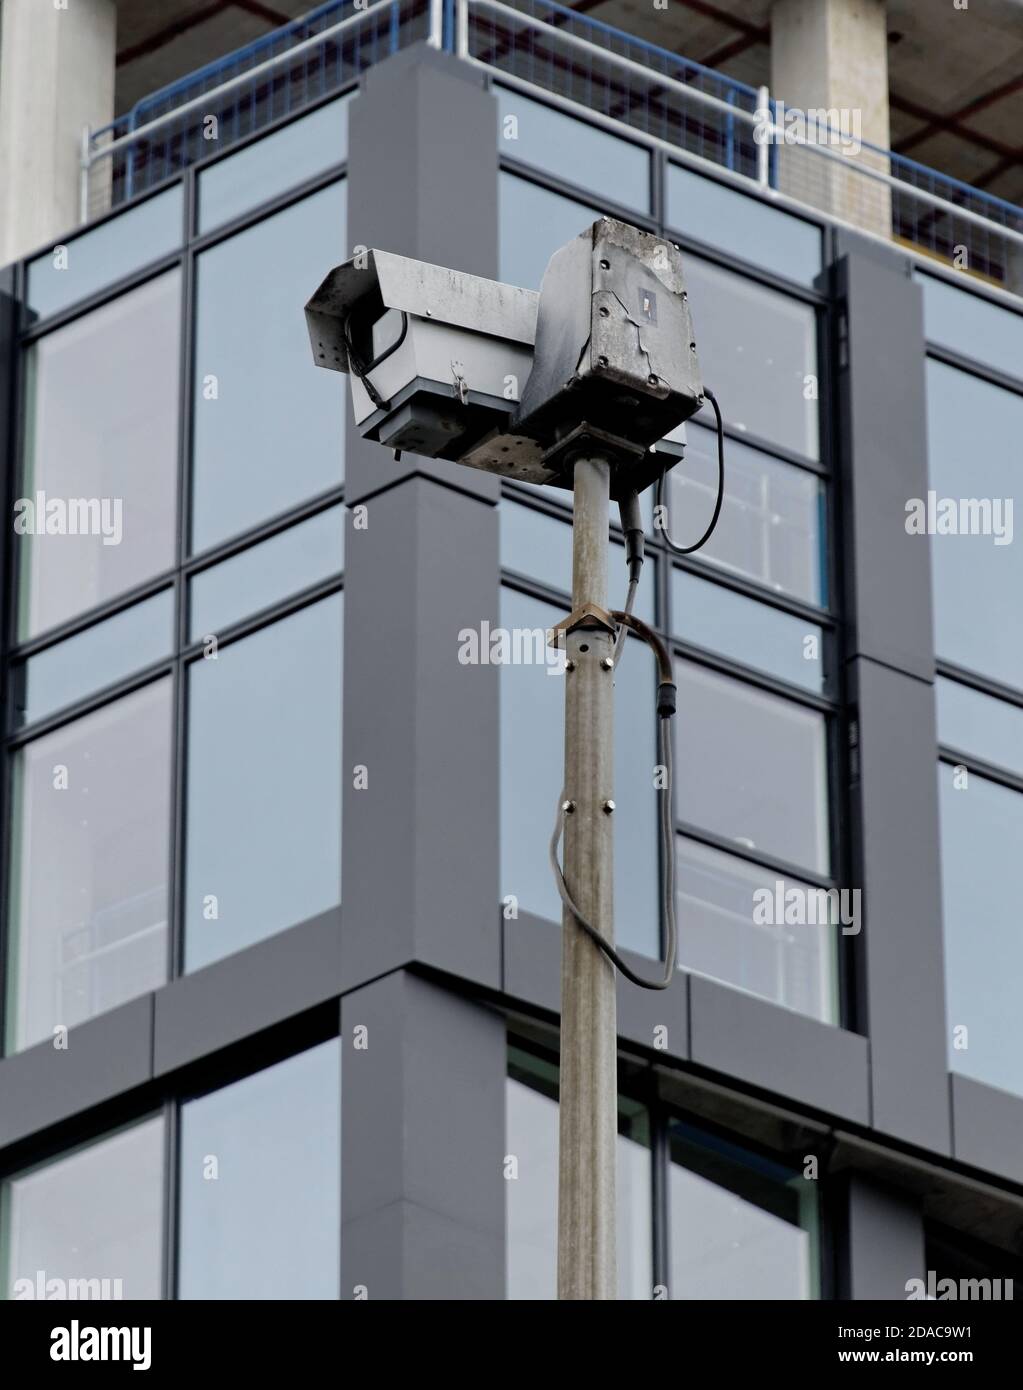 Traffic control camera (Manchester, UK) used for monitoring traffic flow Stock Photo